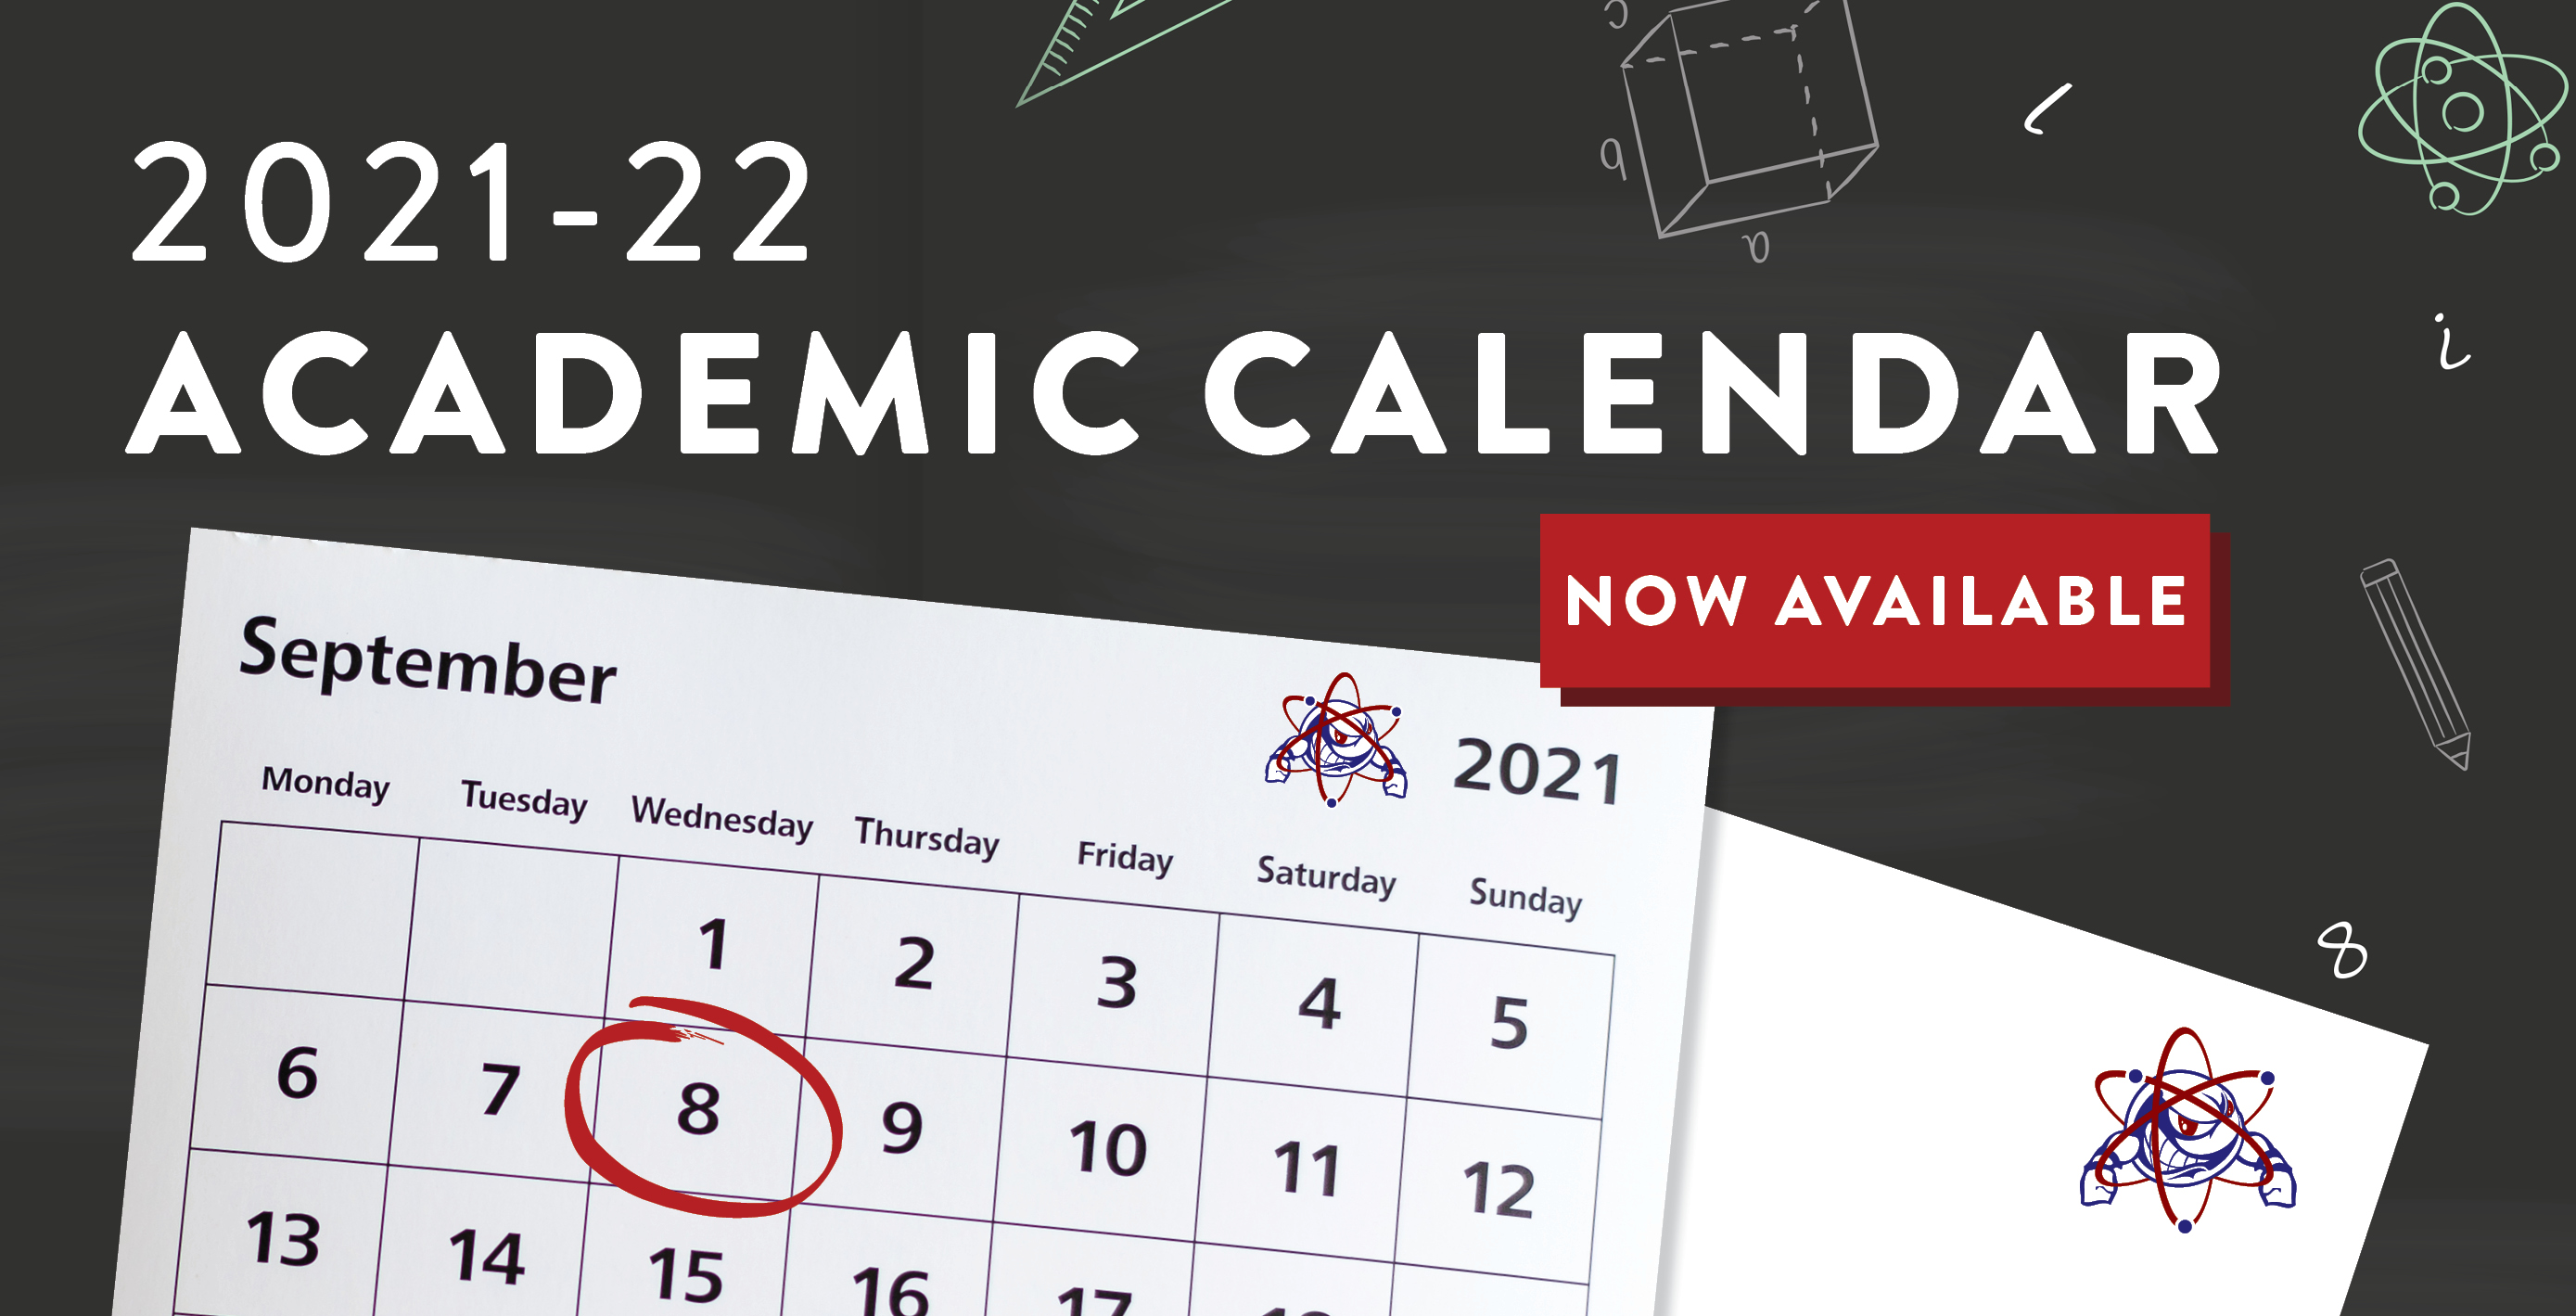 The 2021 - 2022 Academic Calendar is now live and available for you to download today! Stay up to date with your school’s holidays, important dates and events, and much more.